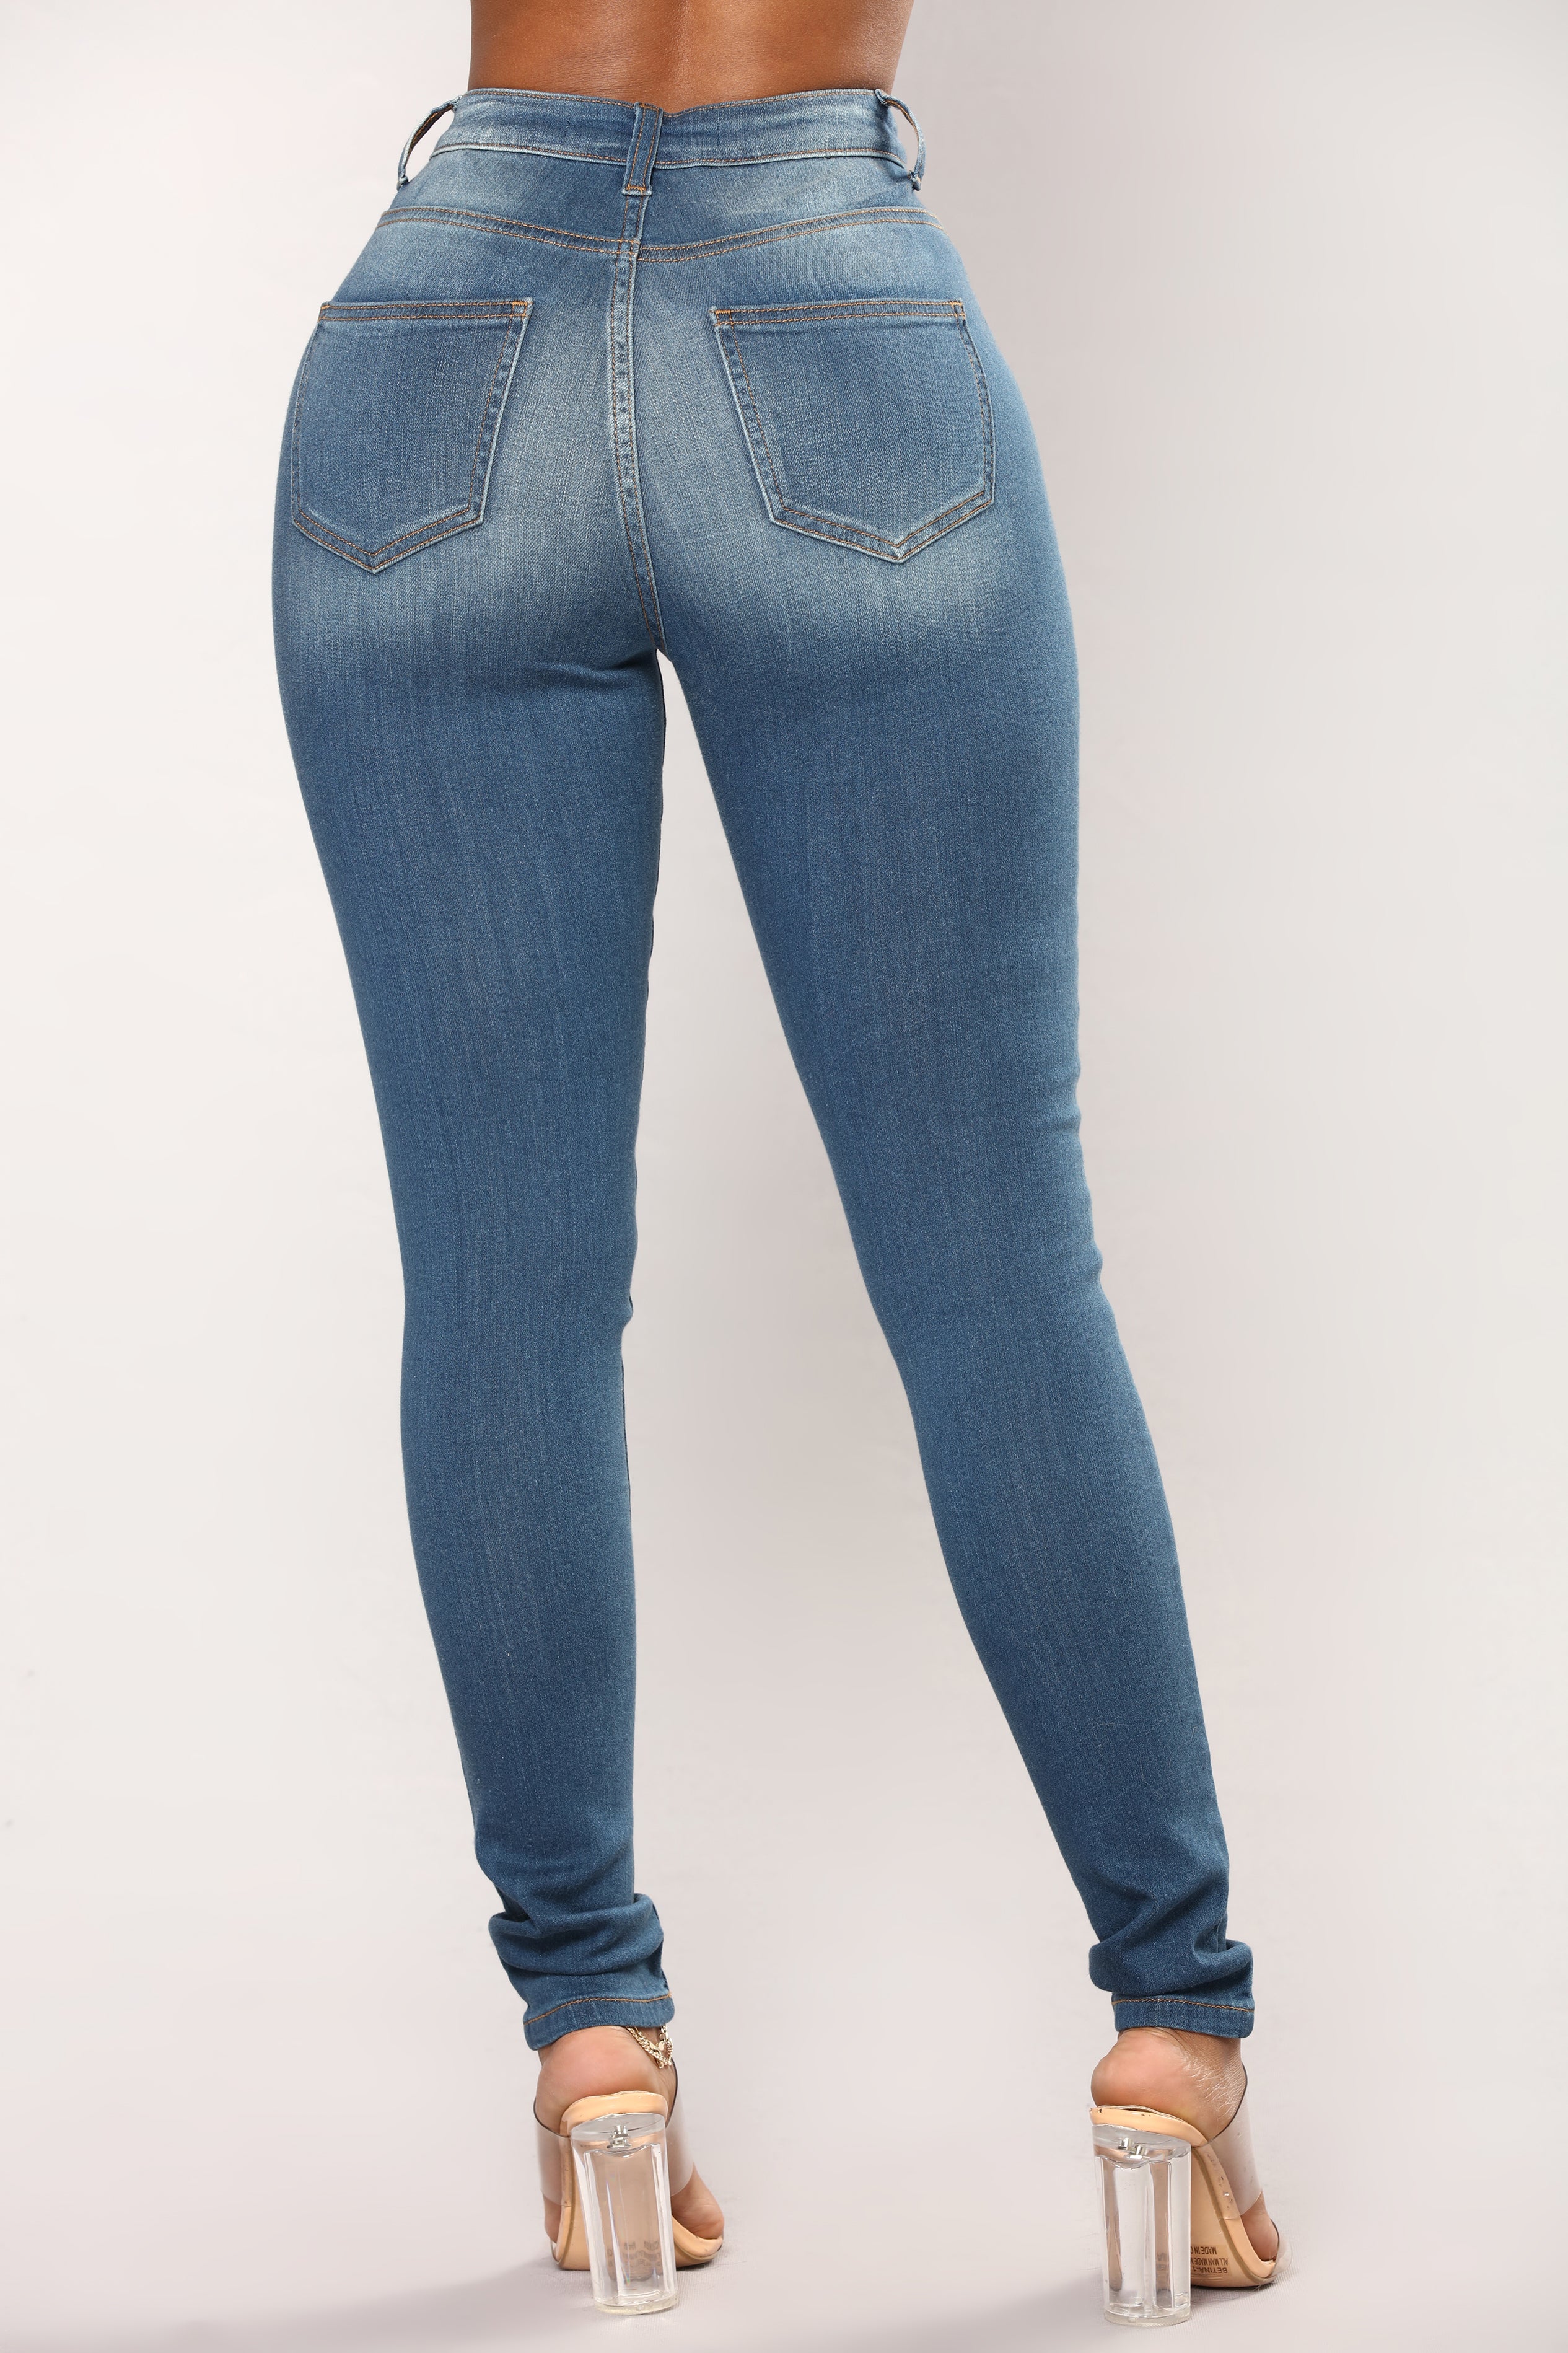 Back And Forth Skinny Jeans - Medium Blue Wash